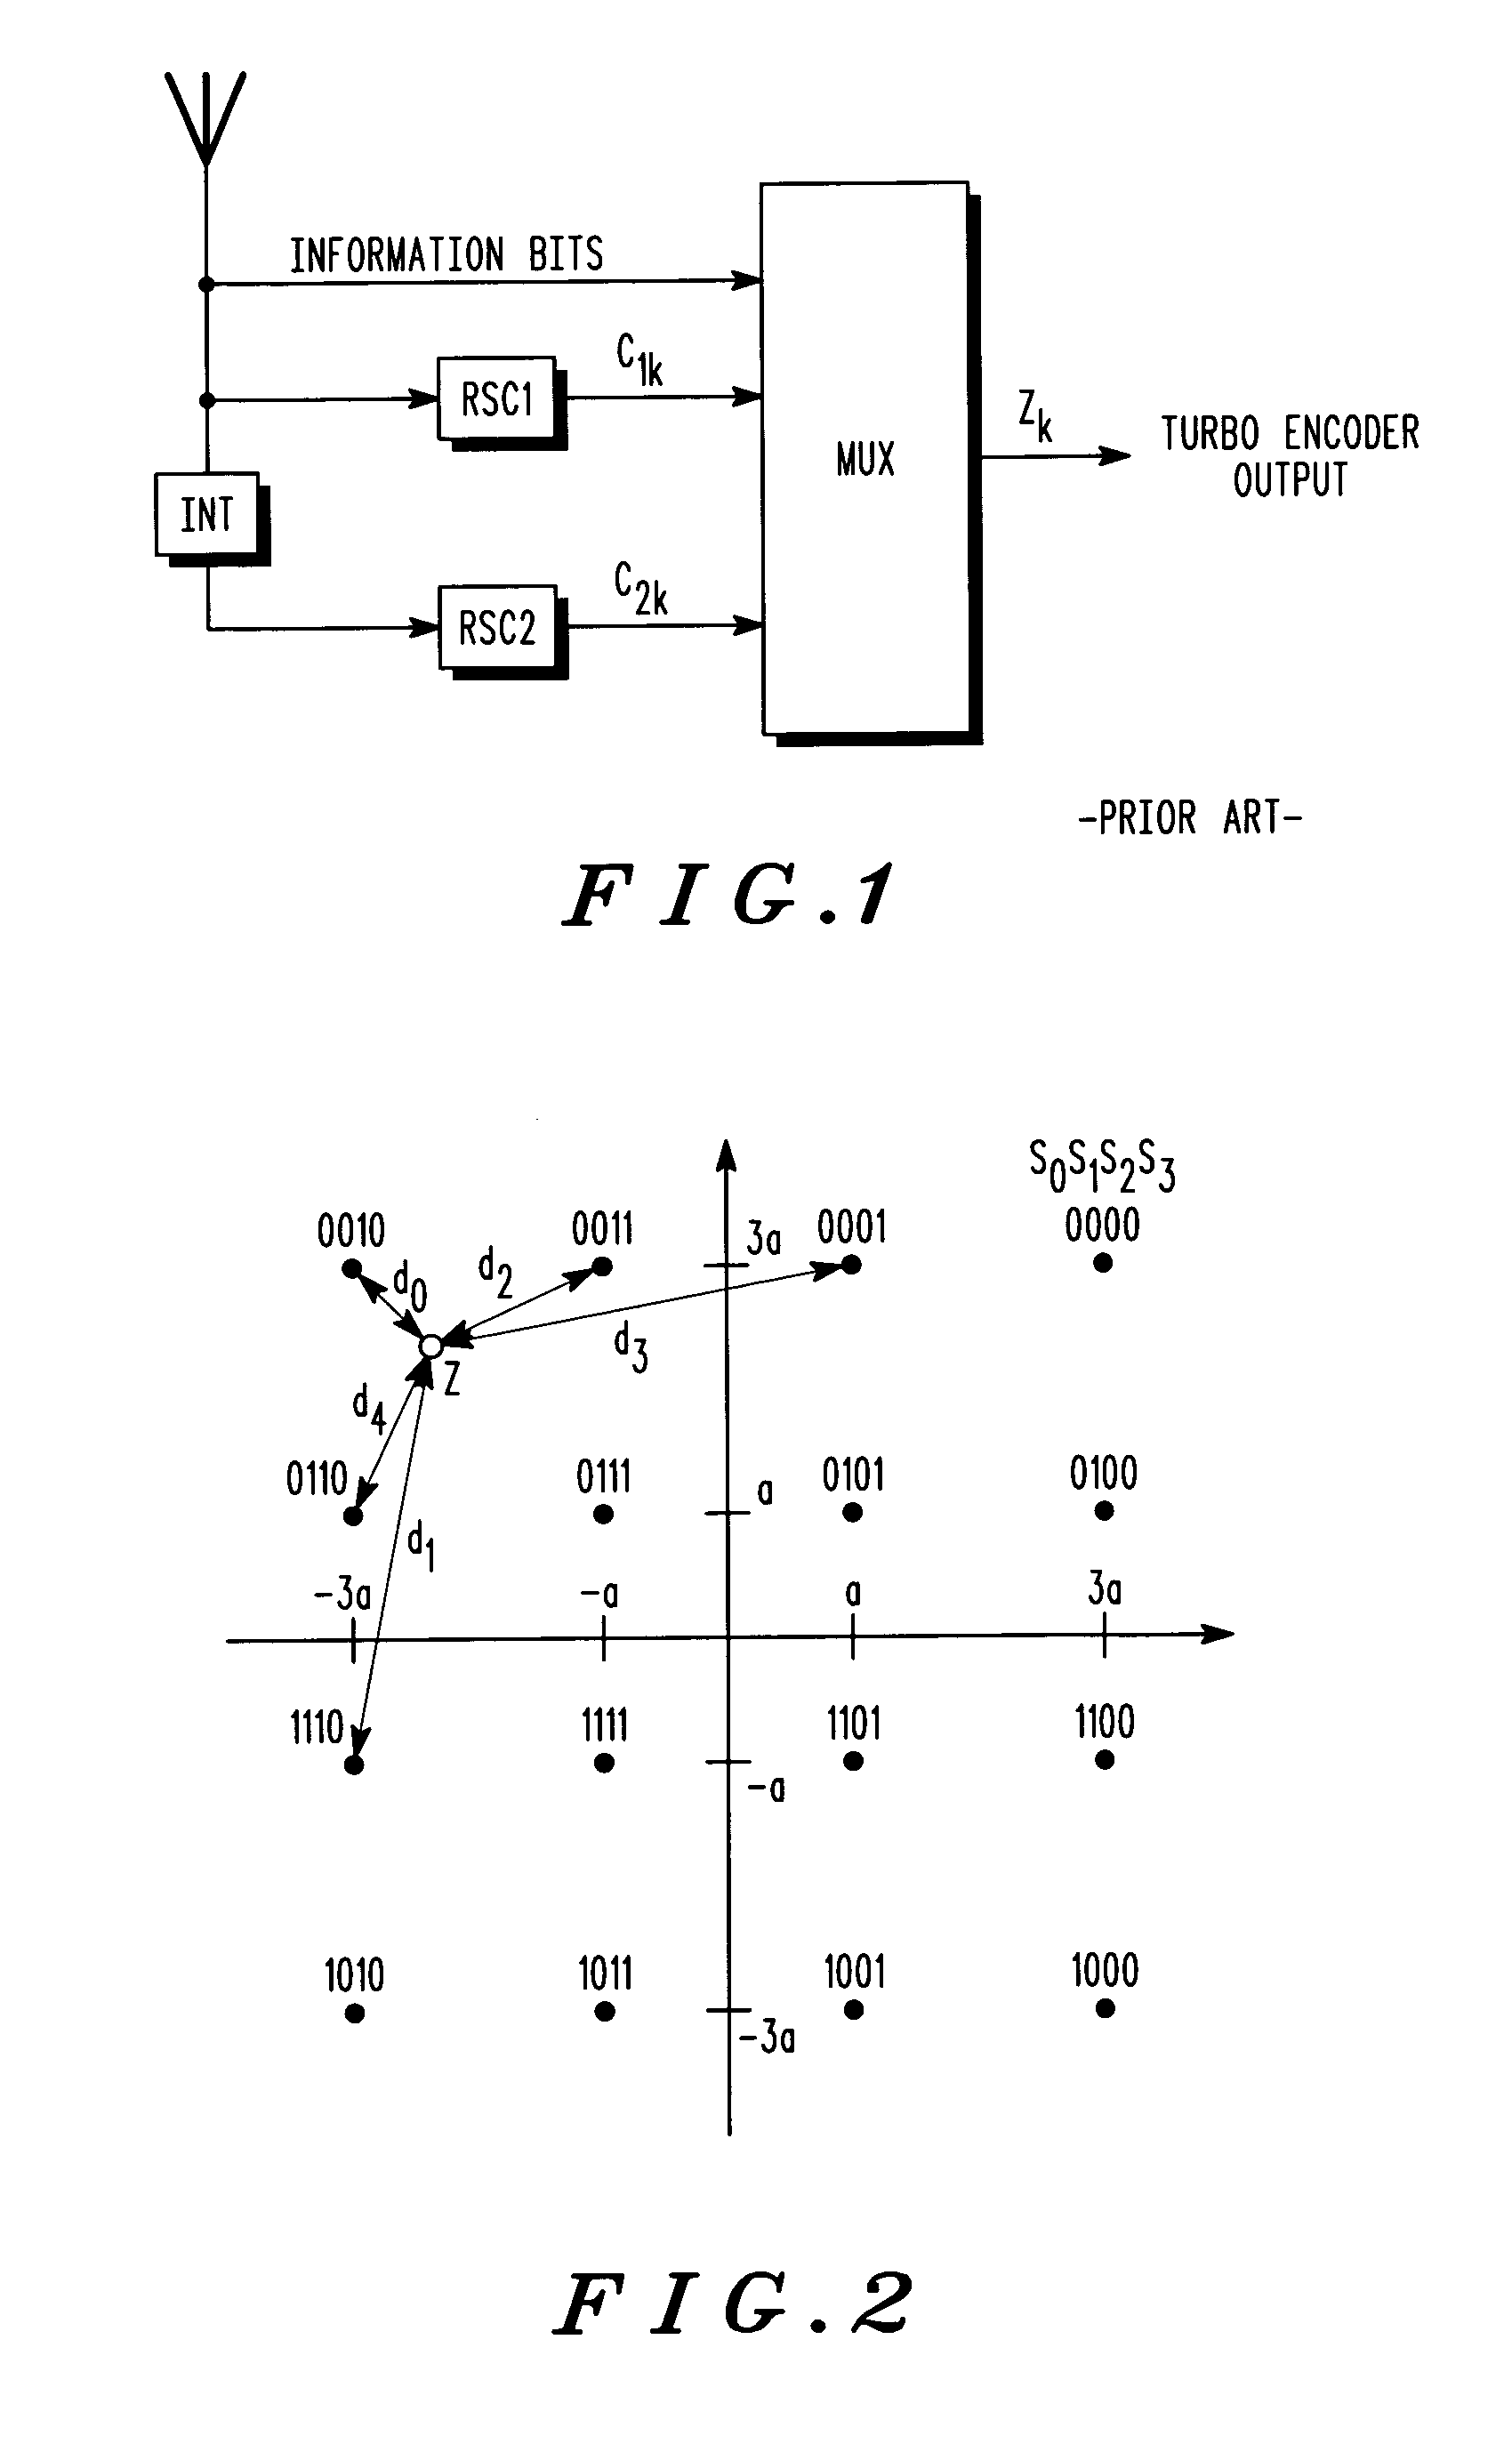 Soft-decision metric generation for higher order modulation